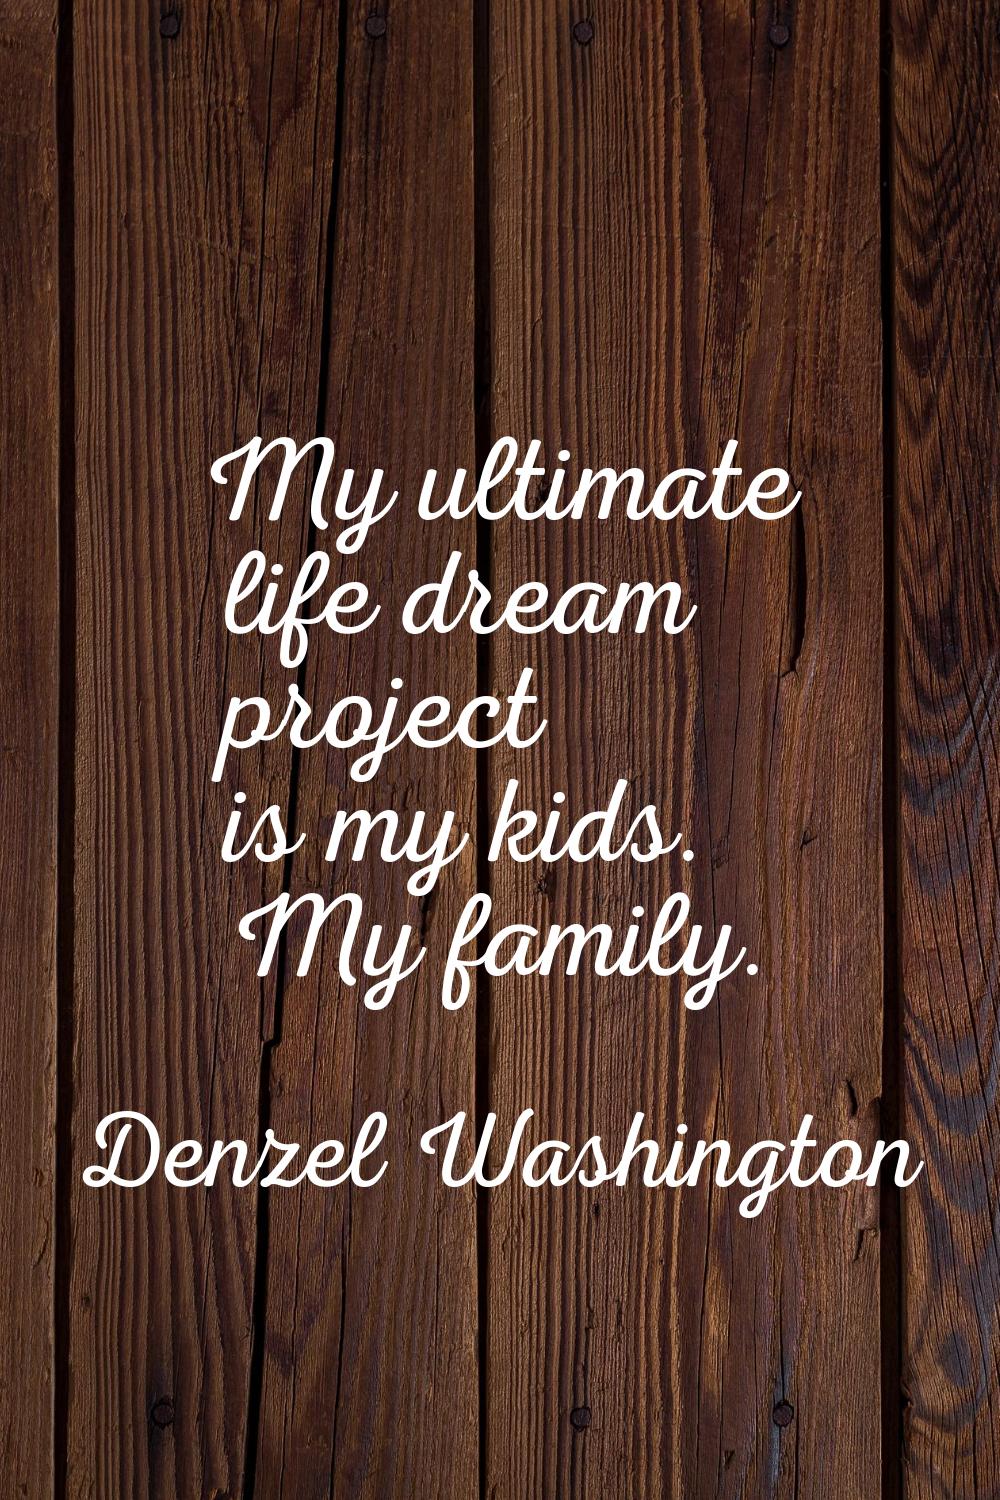 My ultimate life dream project is my kids. My family.